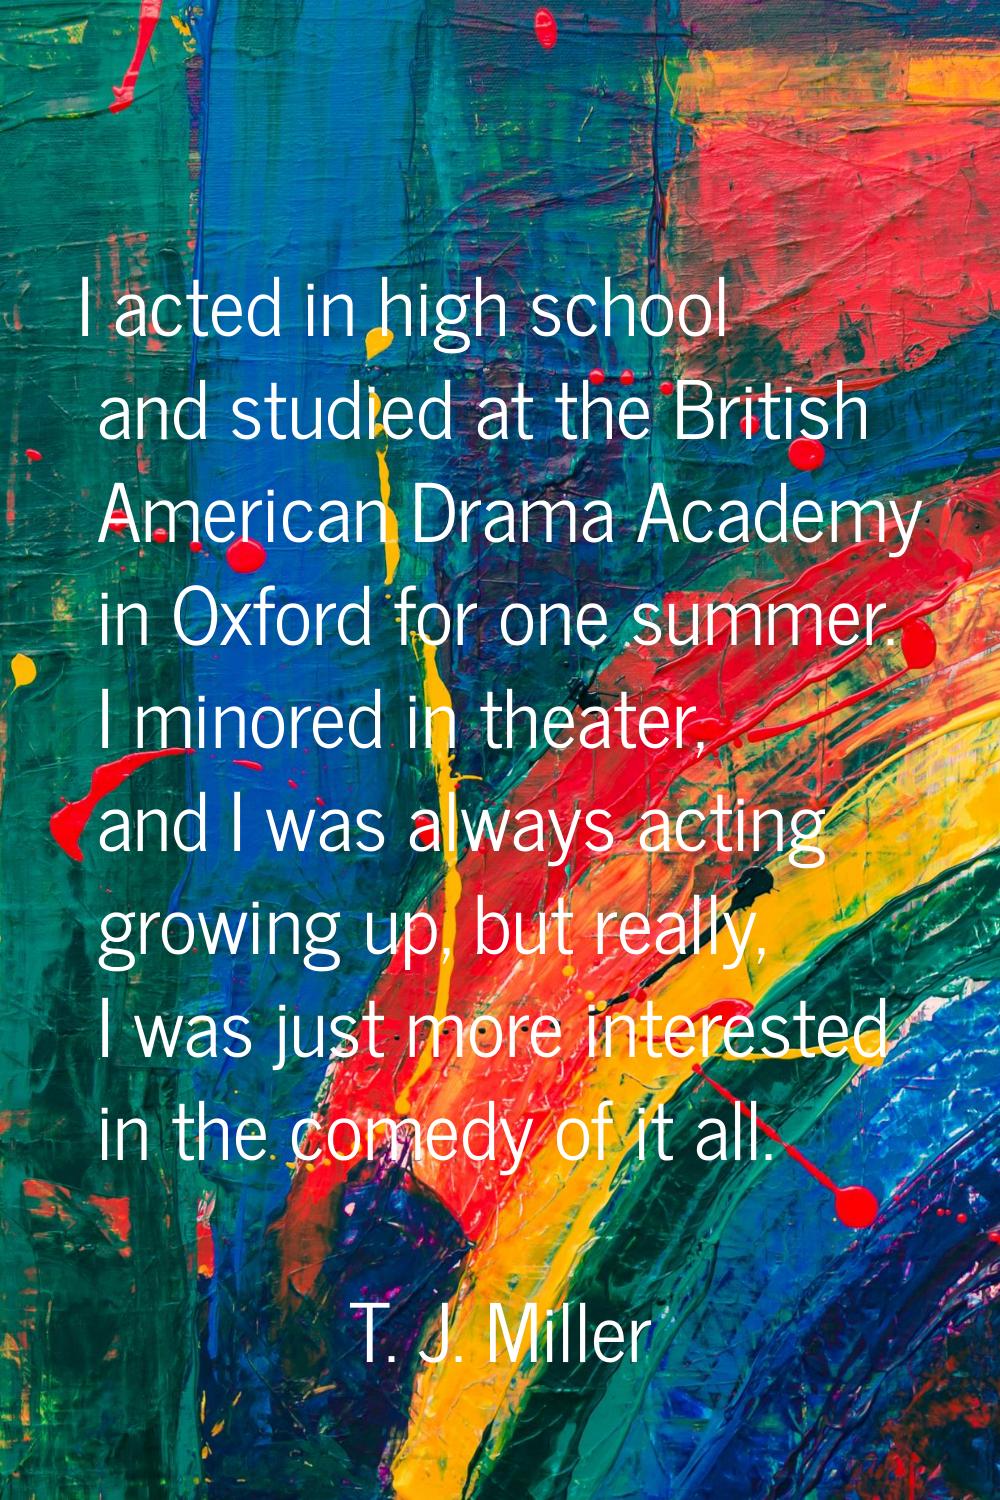 I acted in high school and studied at the British American Drama Academy in Oxford for one summer. 